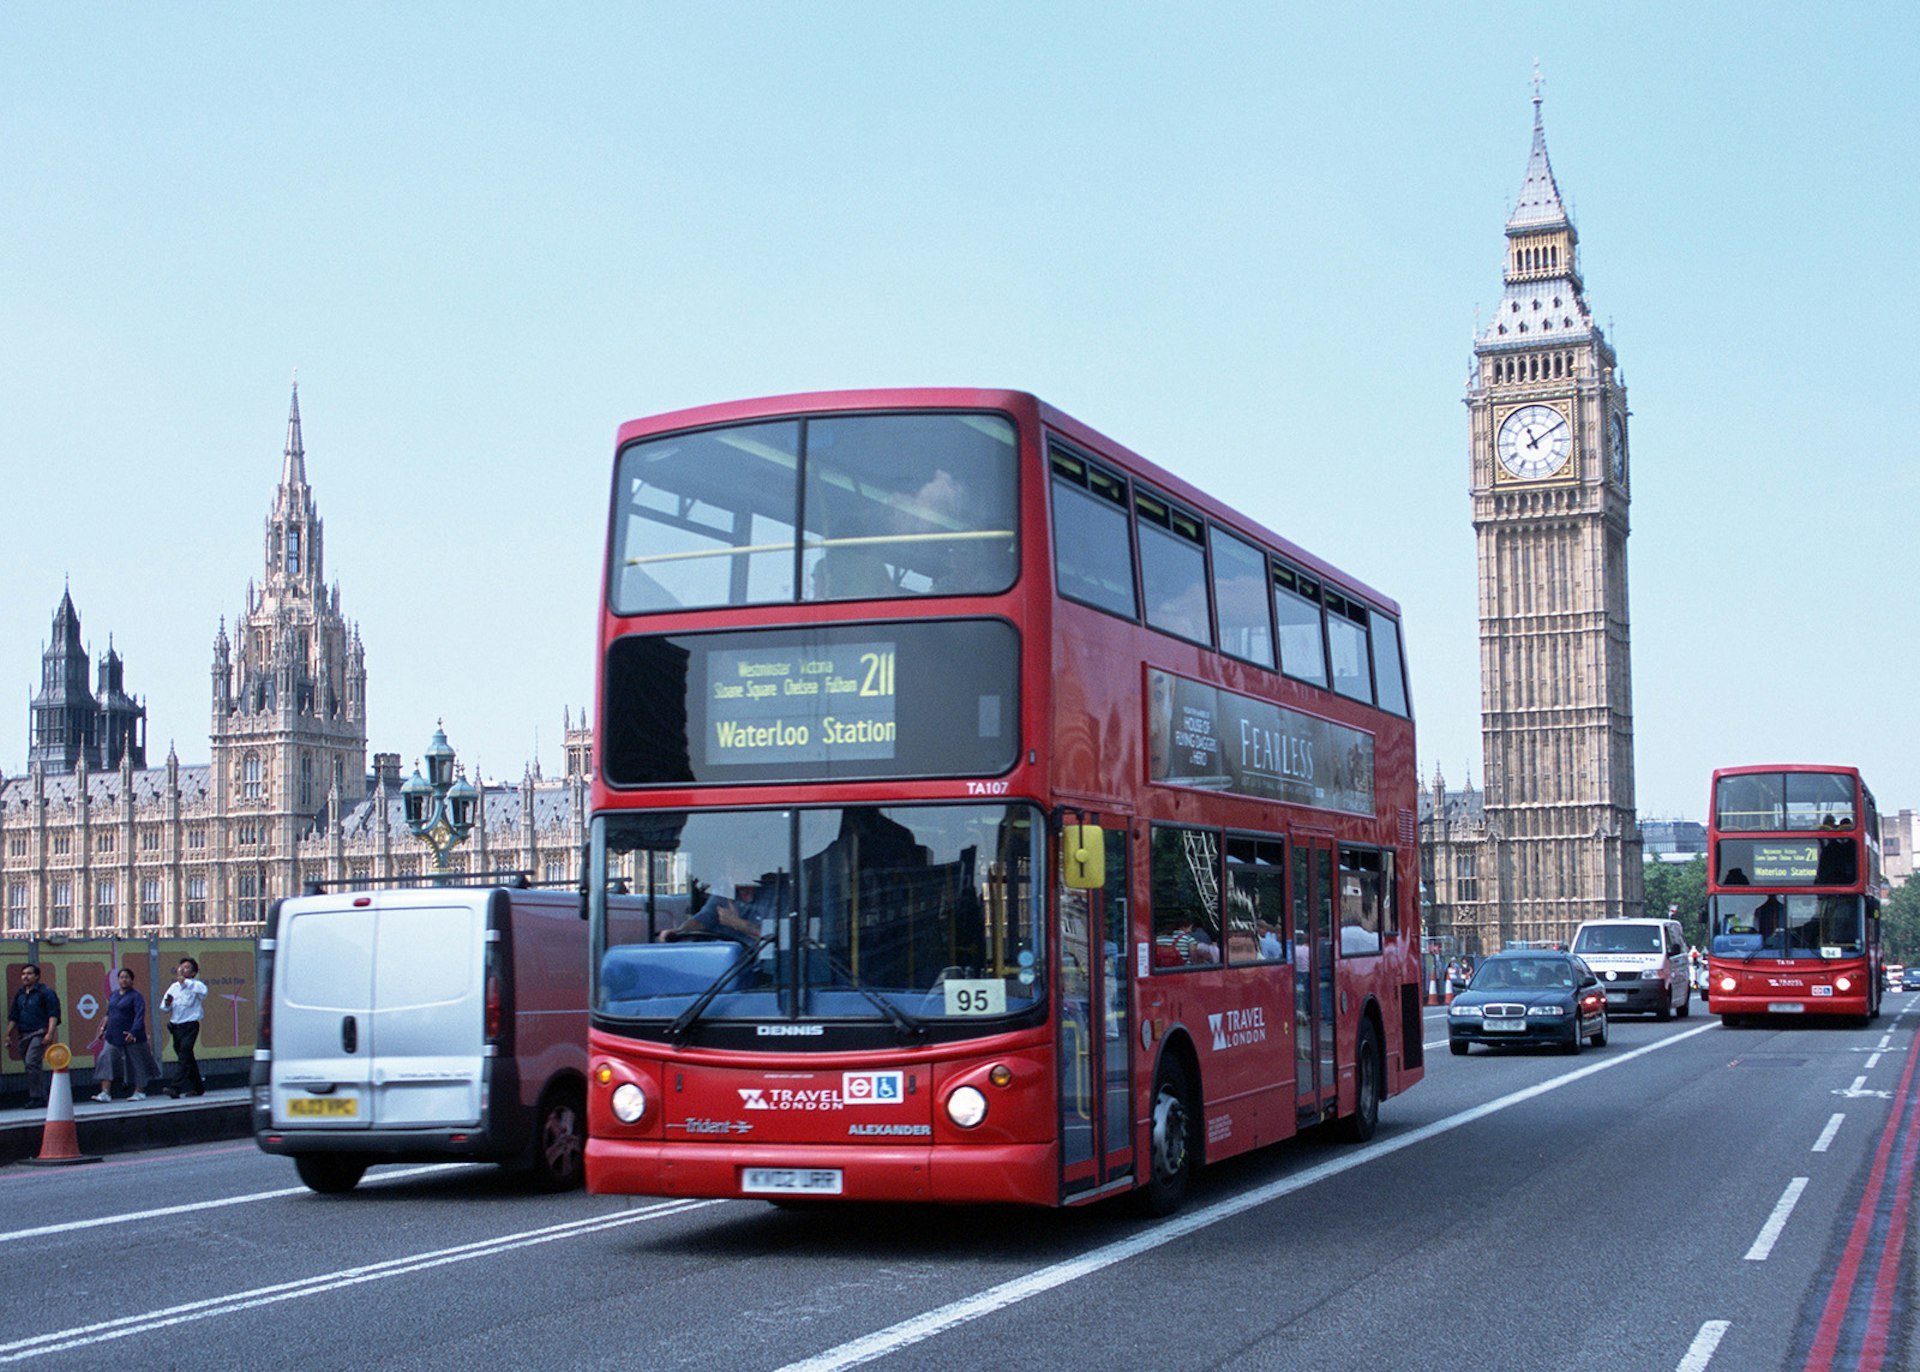 The Campbells advise other travellers to use public transport, such as London's iconic double decker buses – not just for the sake of saving money, but also to see more of a destination © Imagenavi / Getty Images